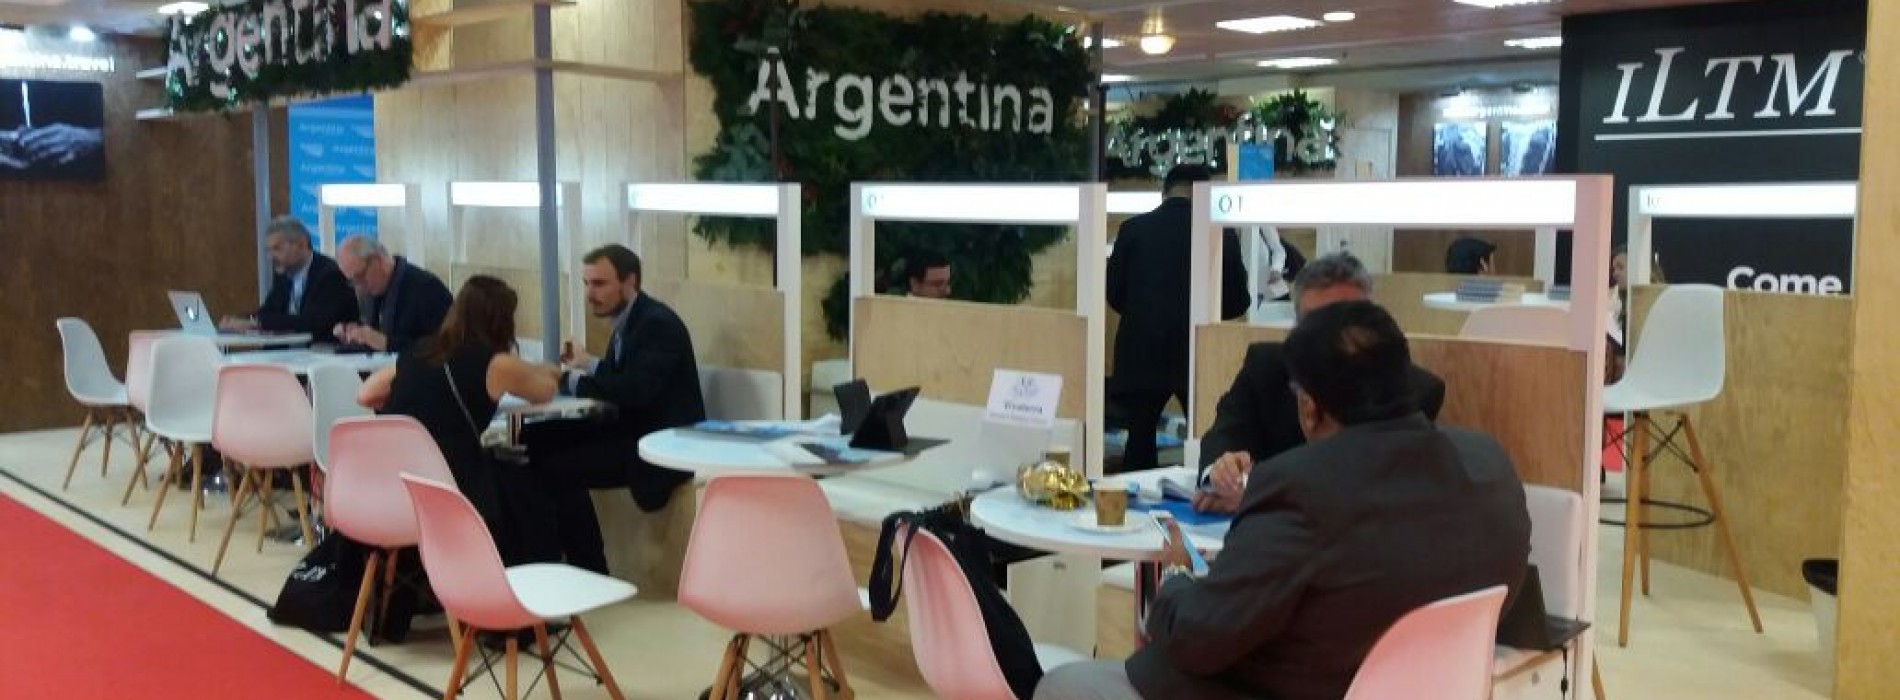 Argentina submitted its offer luxury in France